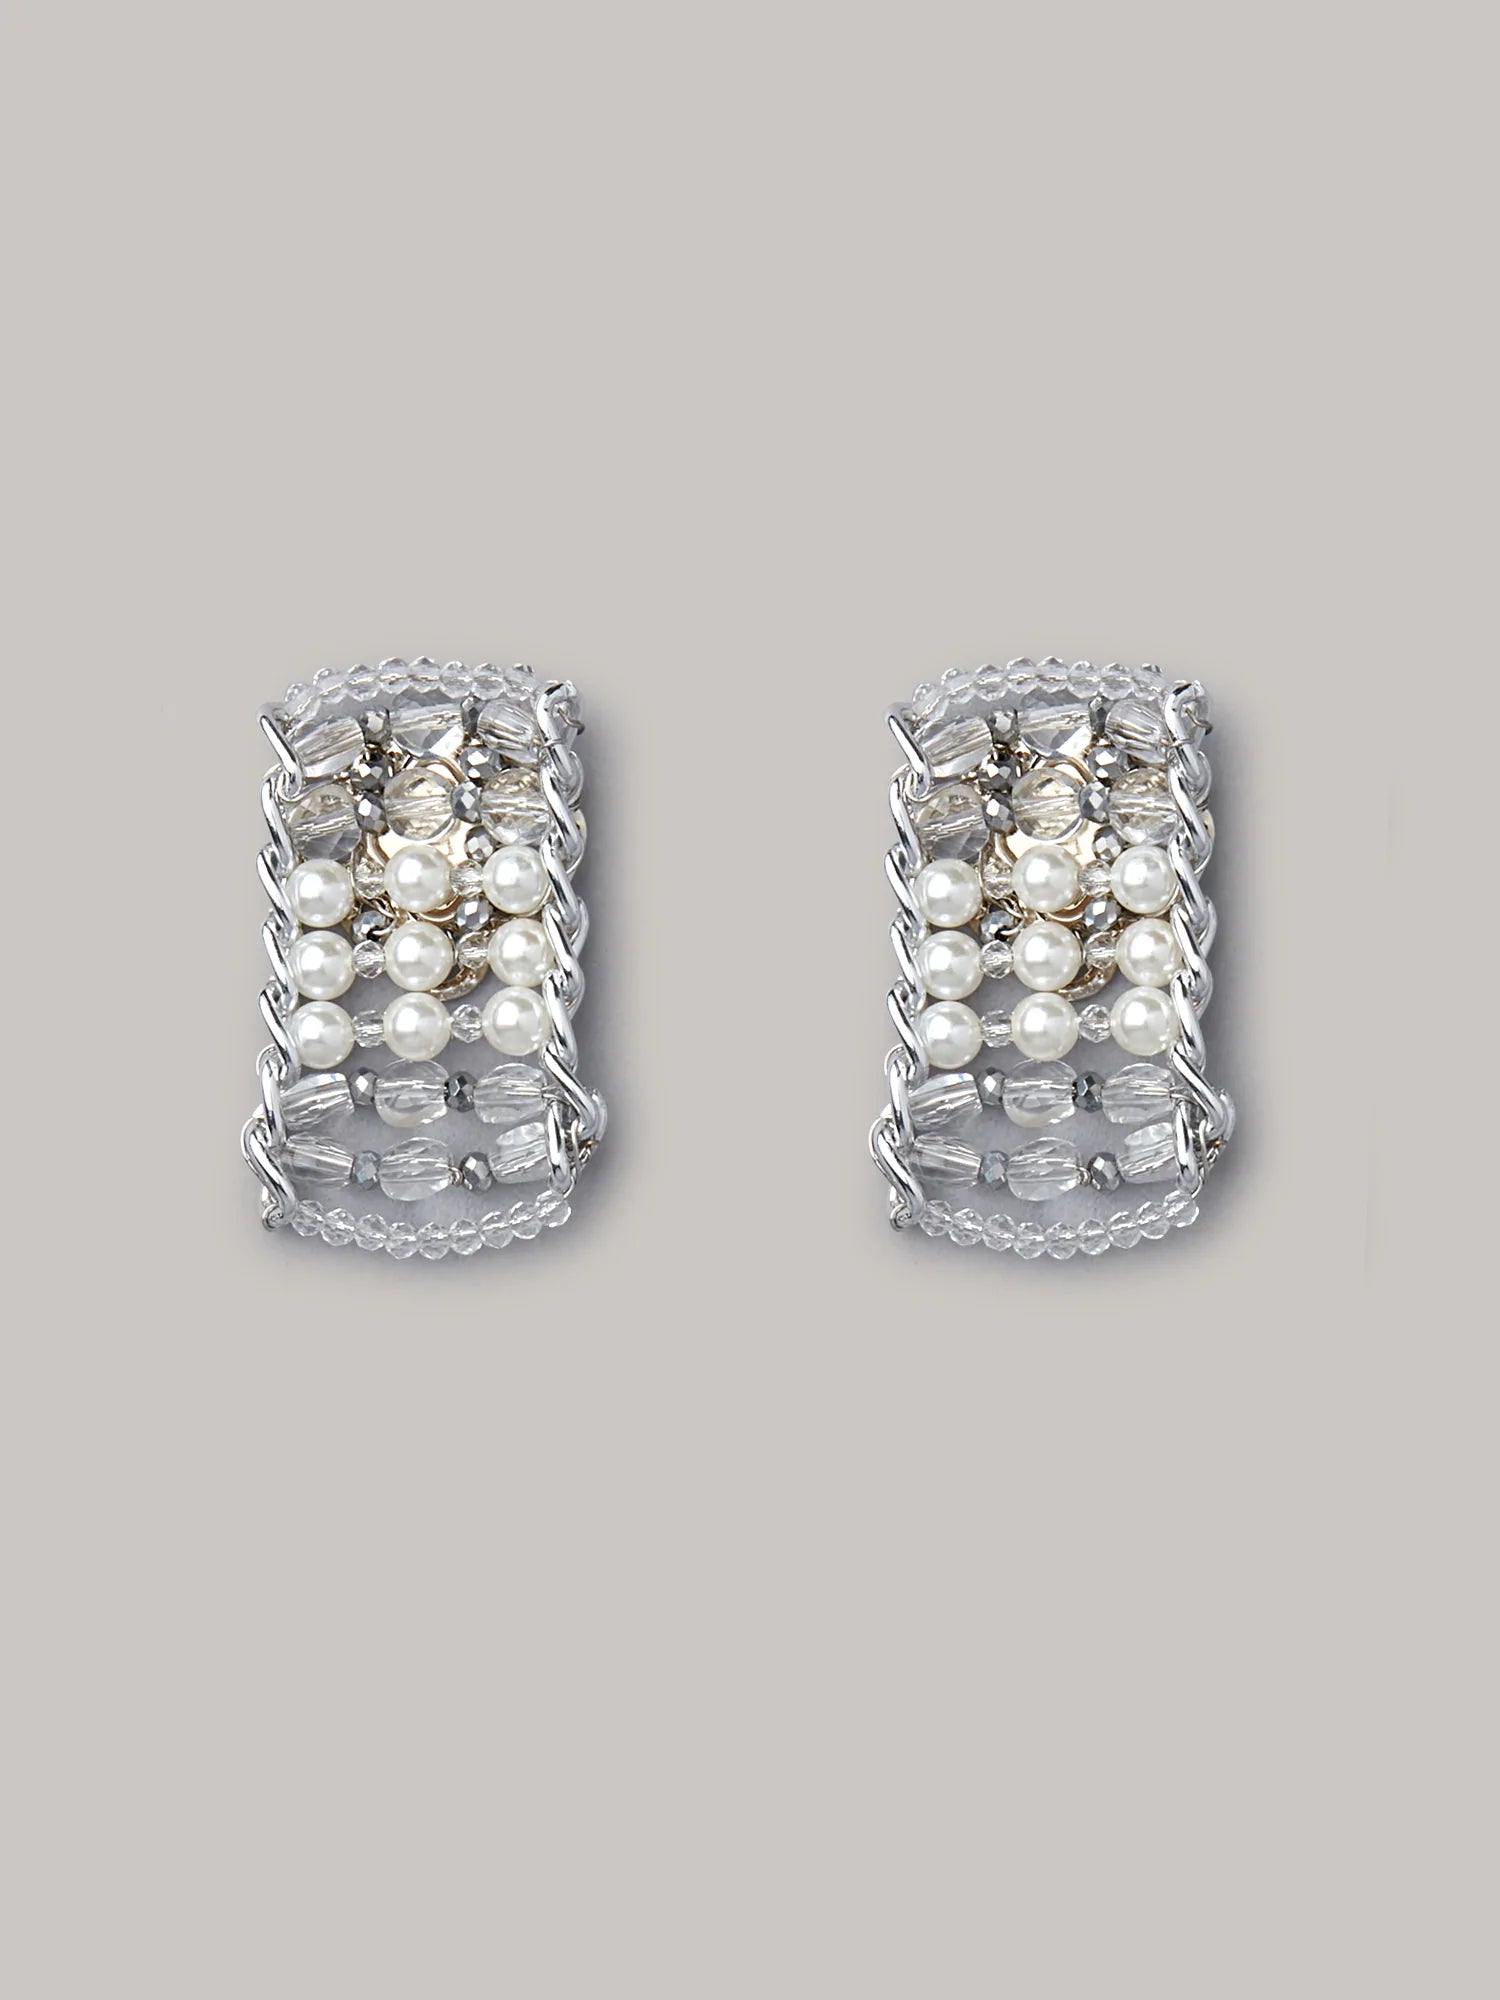 LAERRA SILVER STUDS - House of D’oro